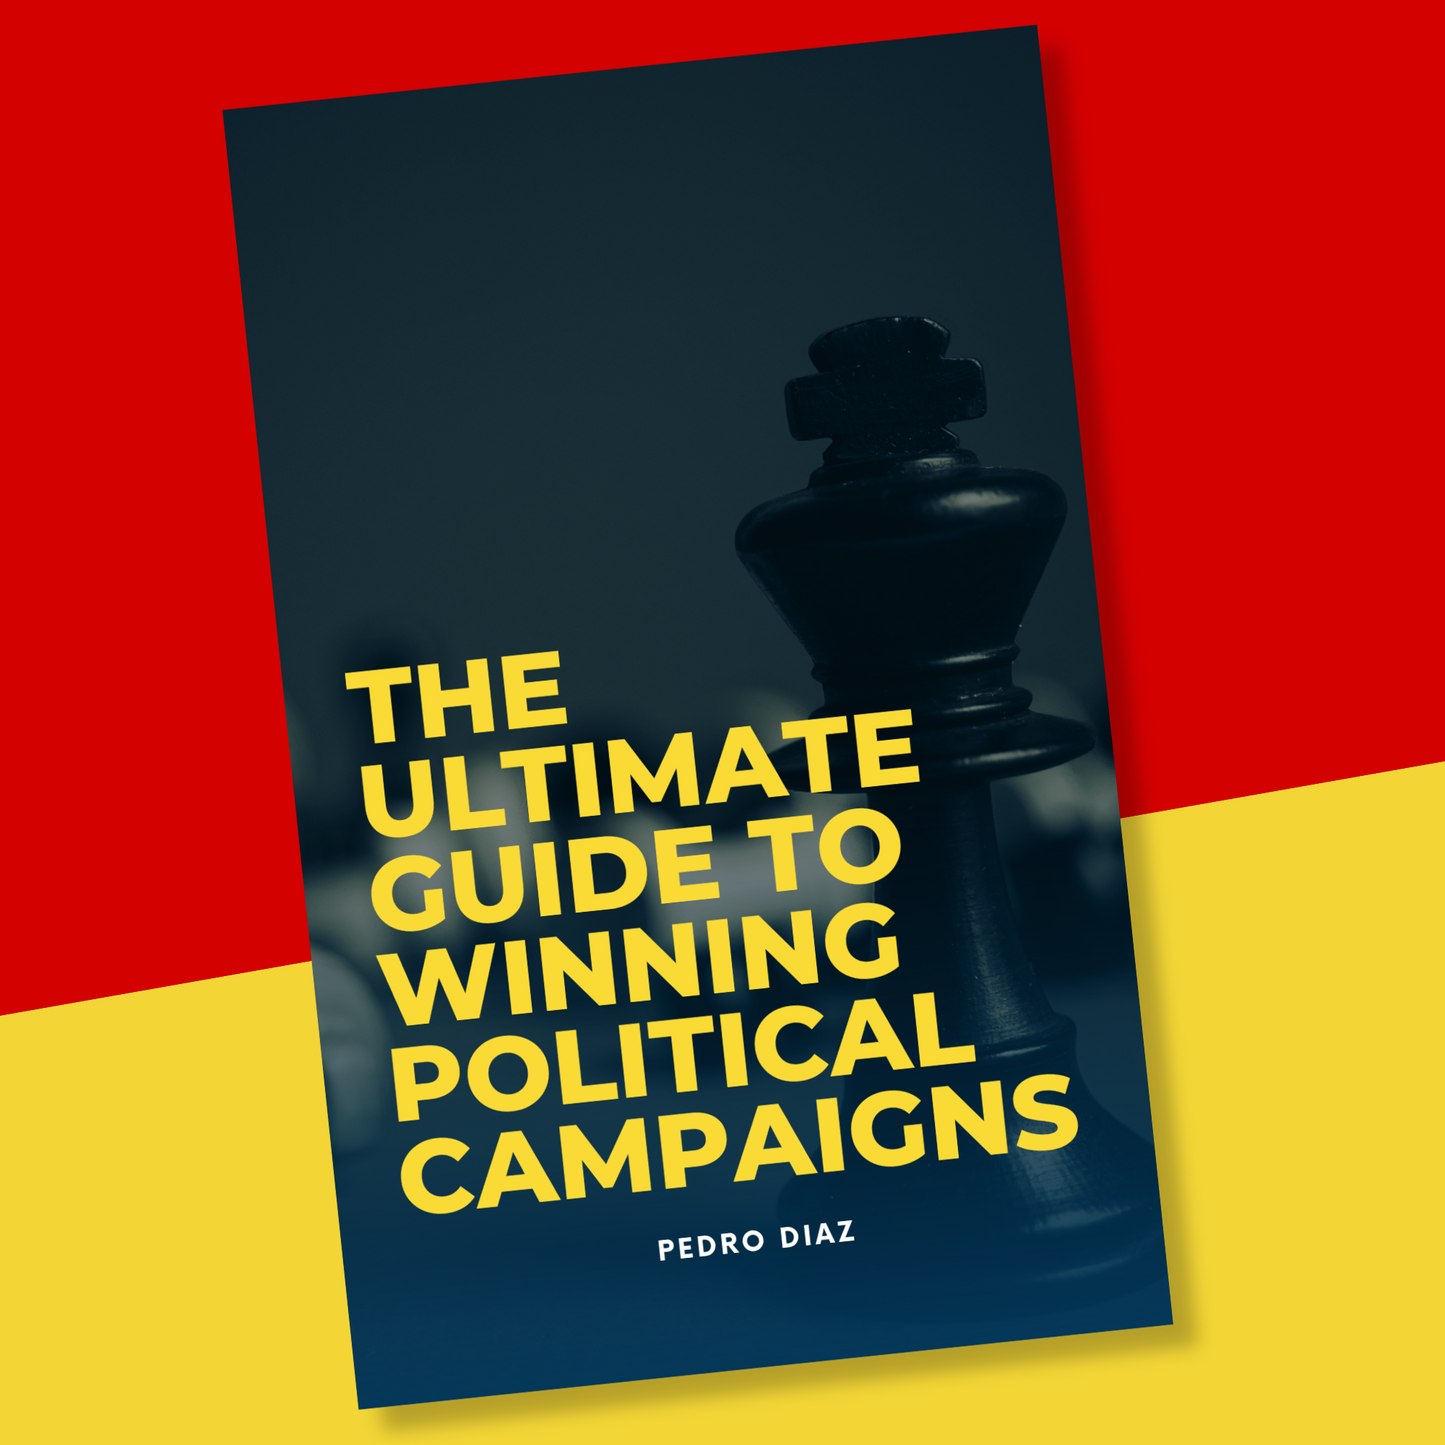 The Ultimate Guide To Winning Political Campaigns by Pedro Diaz [Digital Download]